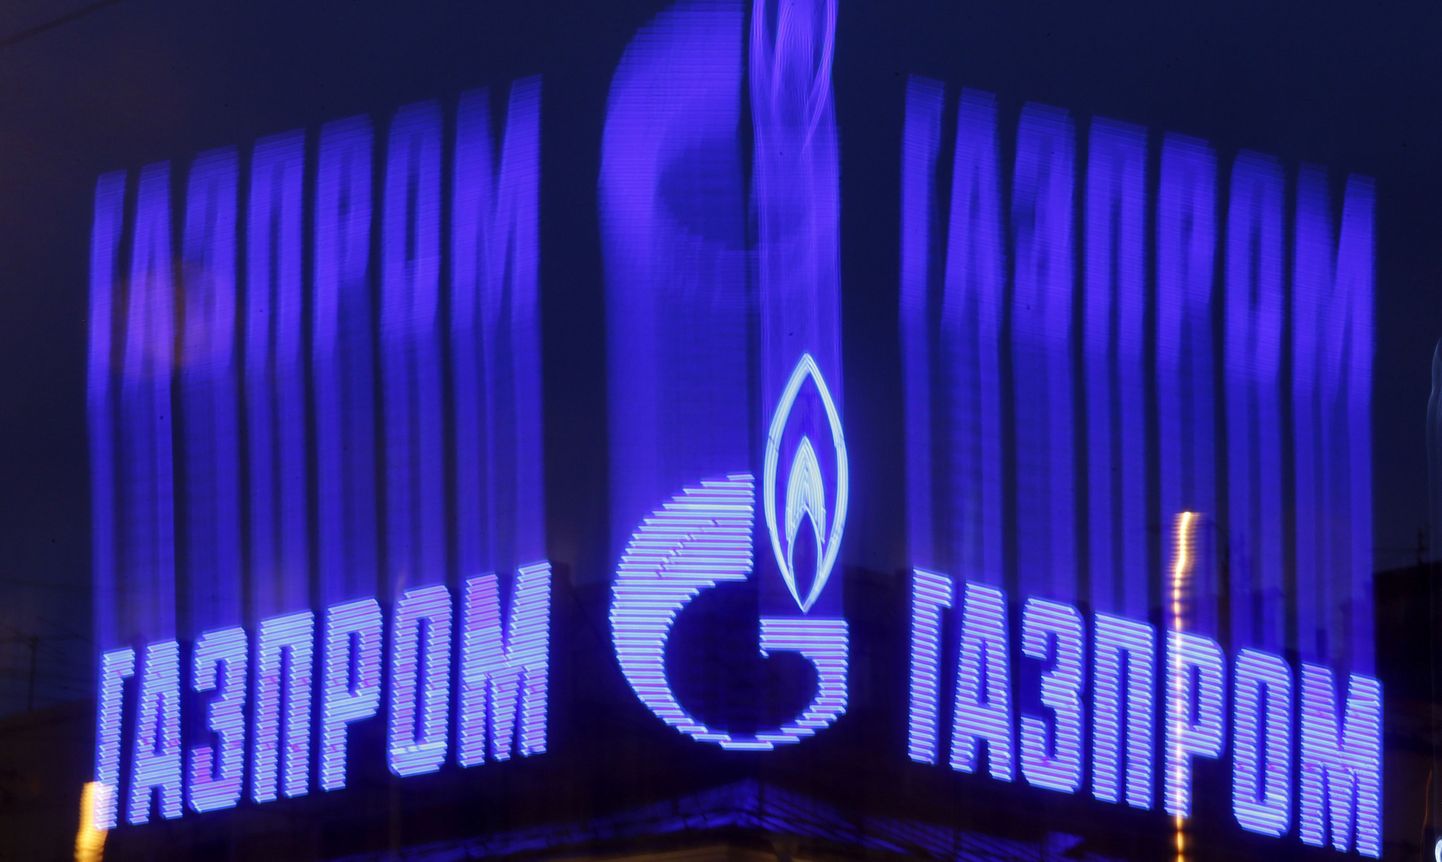 The company logo of Russian natural gas producer Gazprom is seen on an advertisement installed on the roof of a building in St. Petersburg, in this November 14, 2013 file photo. Russian gas producer Gazprom said on October 14, 2014, its first-half net profit was down to 450.58 billion roubles (6.92 billion pounds) from 582.7 billion roubles. Photo taken with long exposure.  REUTERS/Alexander Demianchuk/Files (RUSSIA - Tags: BUSINESS ENERGY)